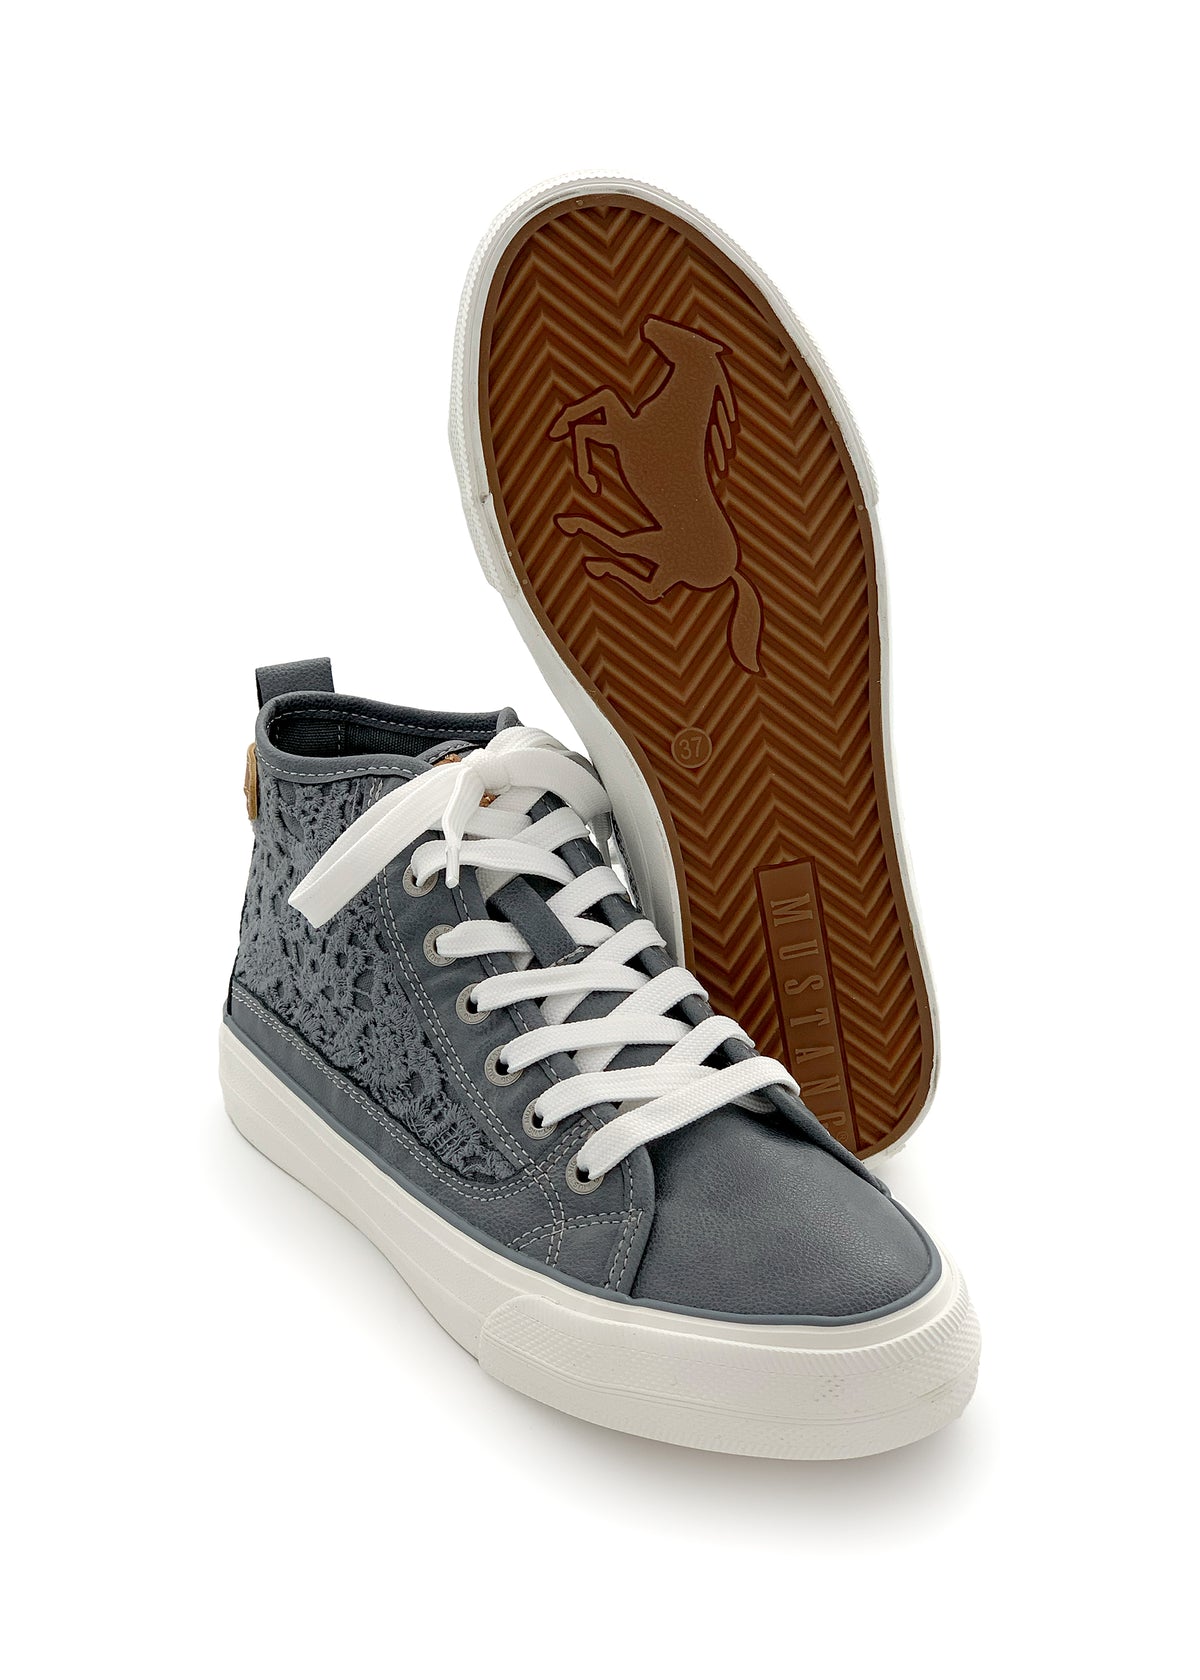 Lace-up sneakers with straps - blue-grey, vegan